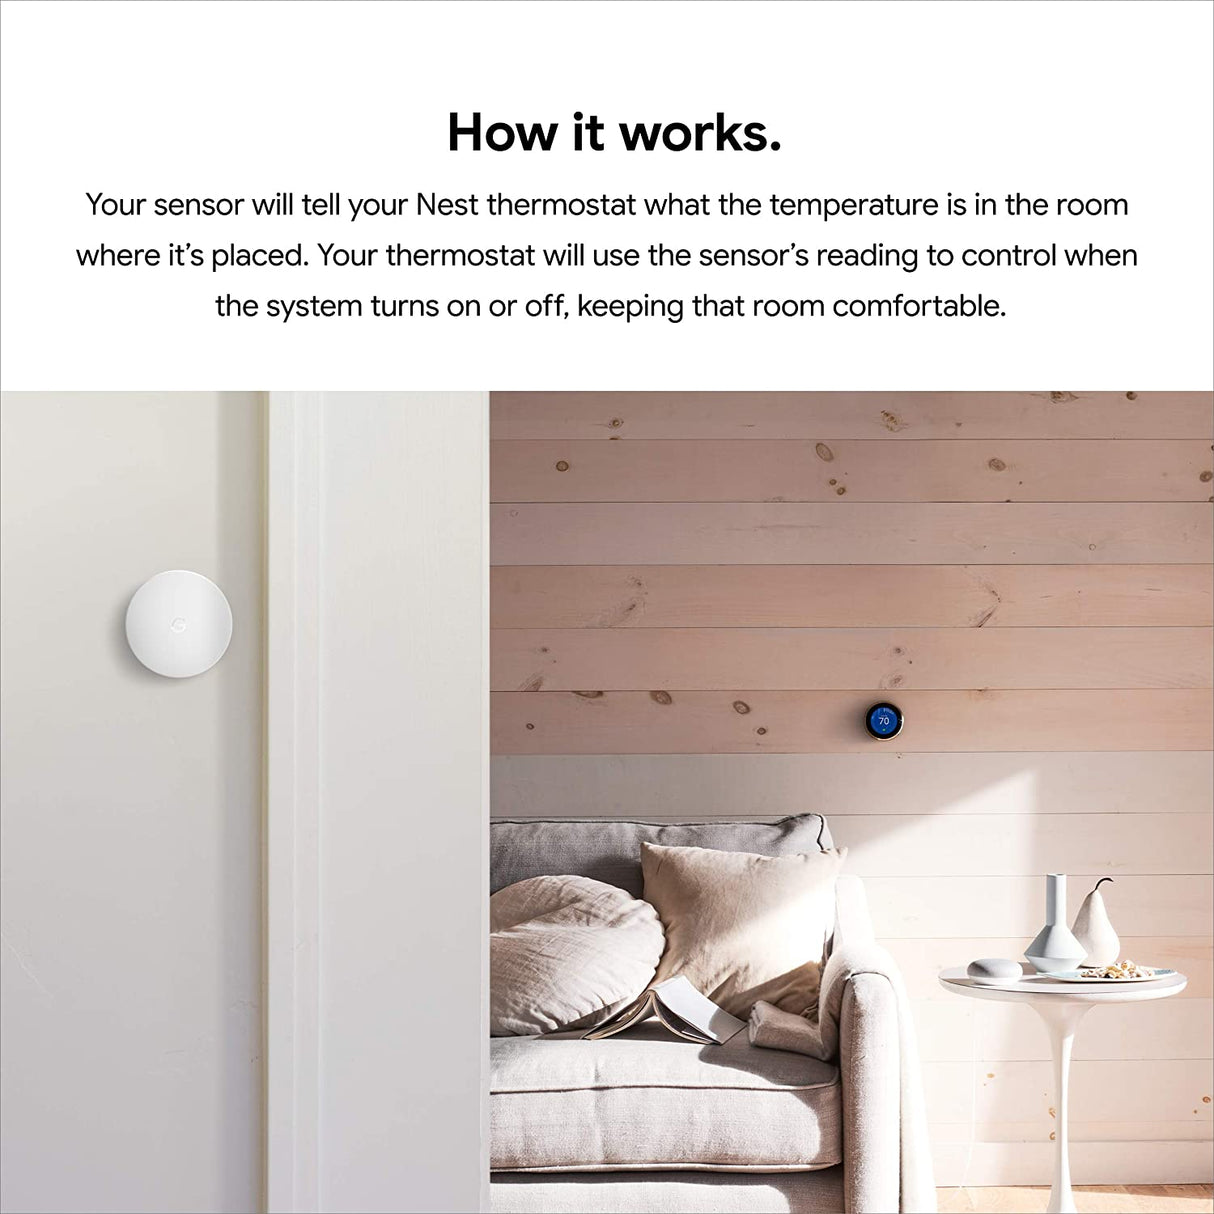 Google Nest Learning Thermostat with Nest Temperature Sensor